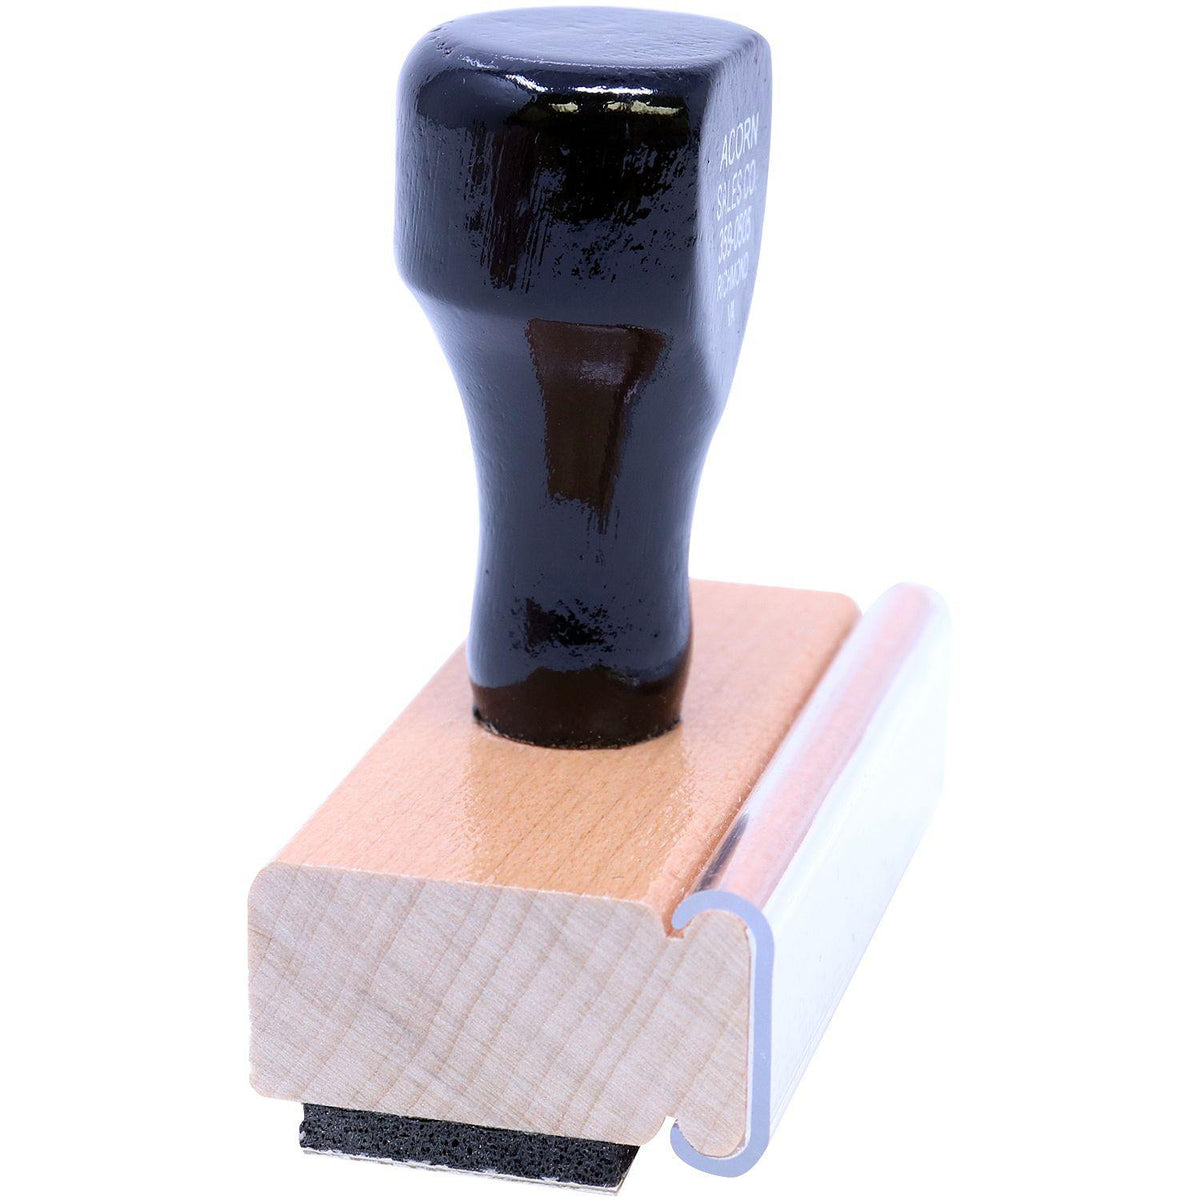 Side View of Large Client&#39;s Copy Rubber Stamp at an Angle